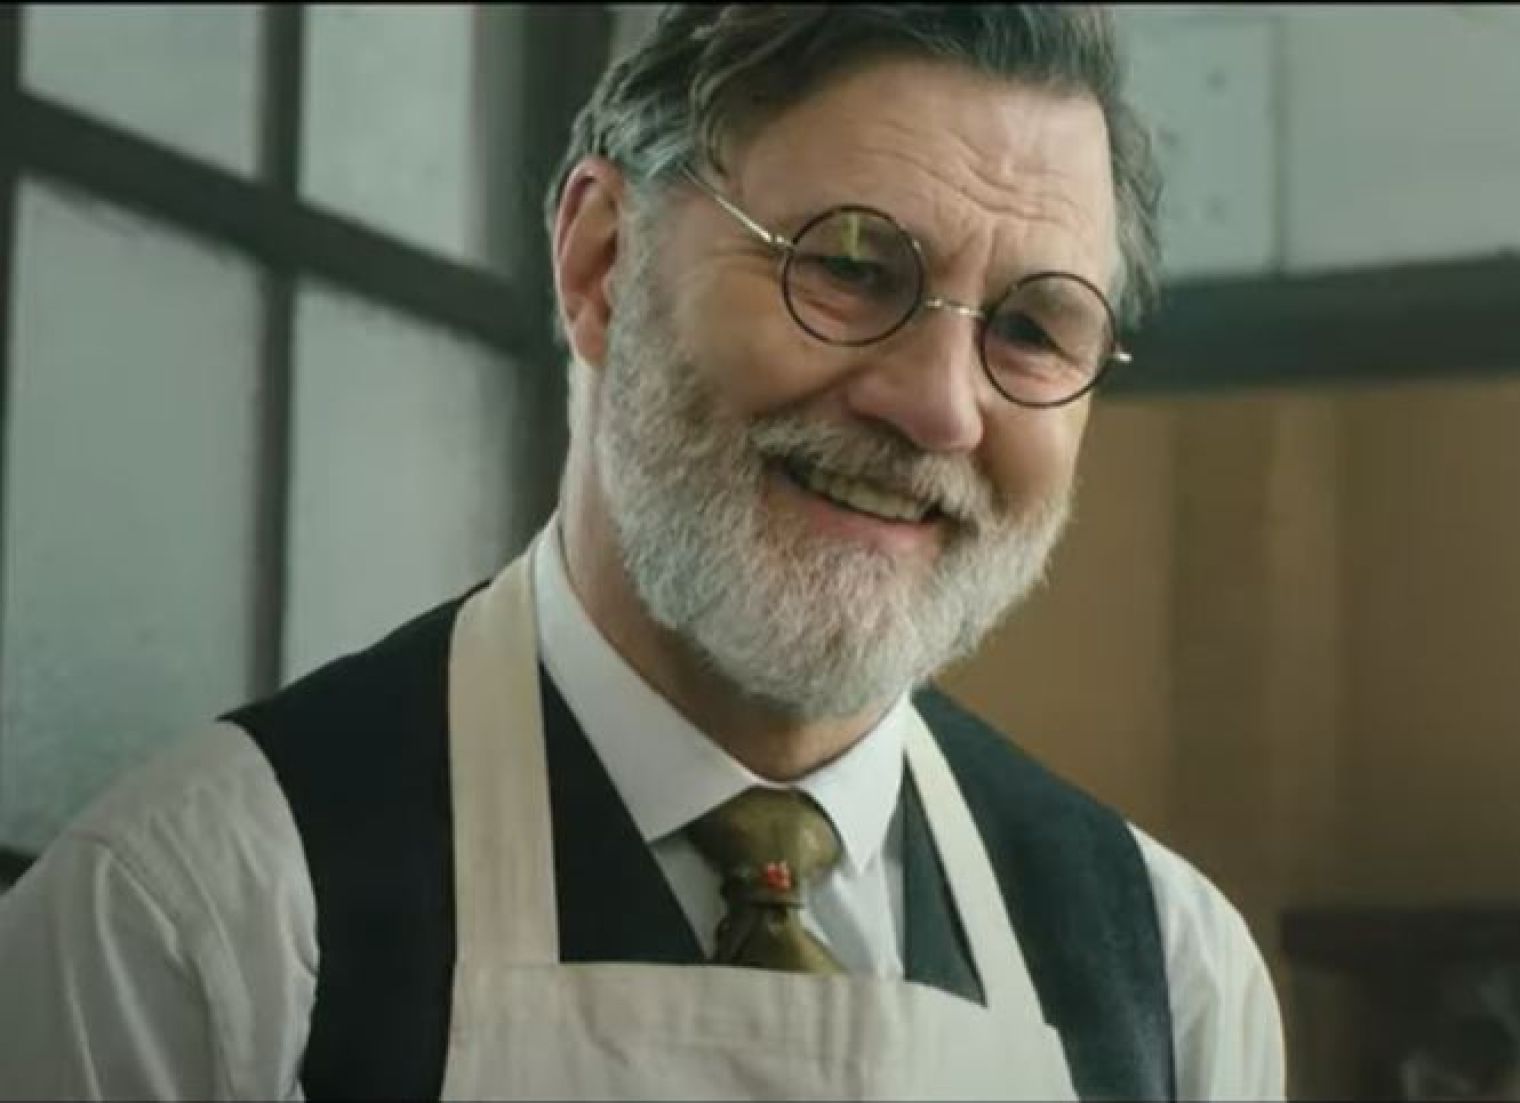 Beautiful new period drama The Colour Room, starring David Morrissey, premieres today on Sky Cinema